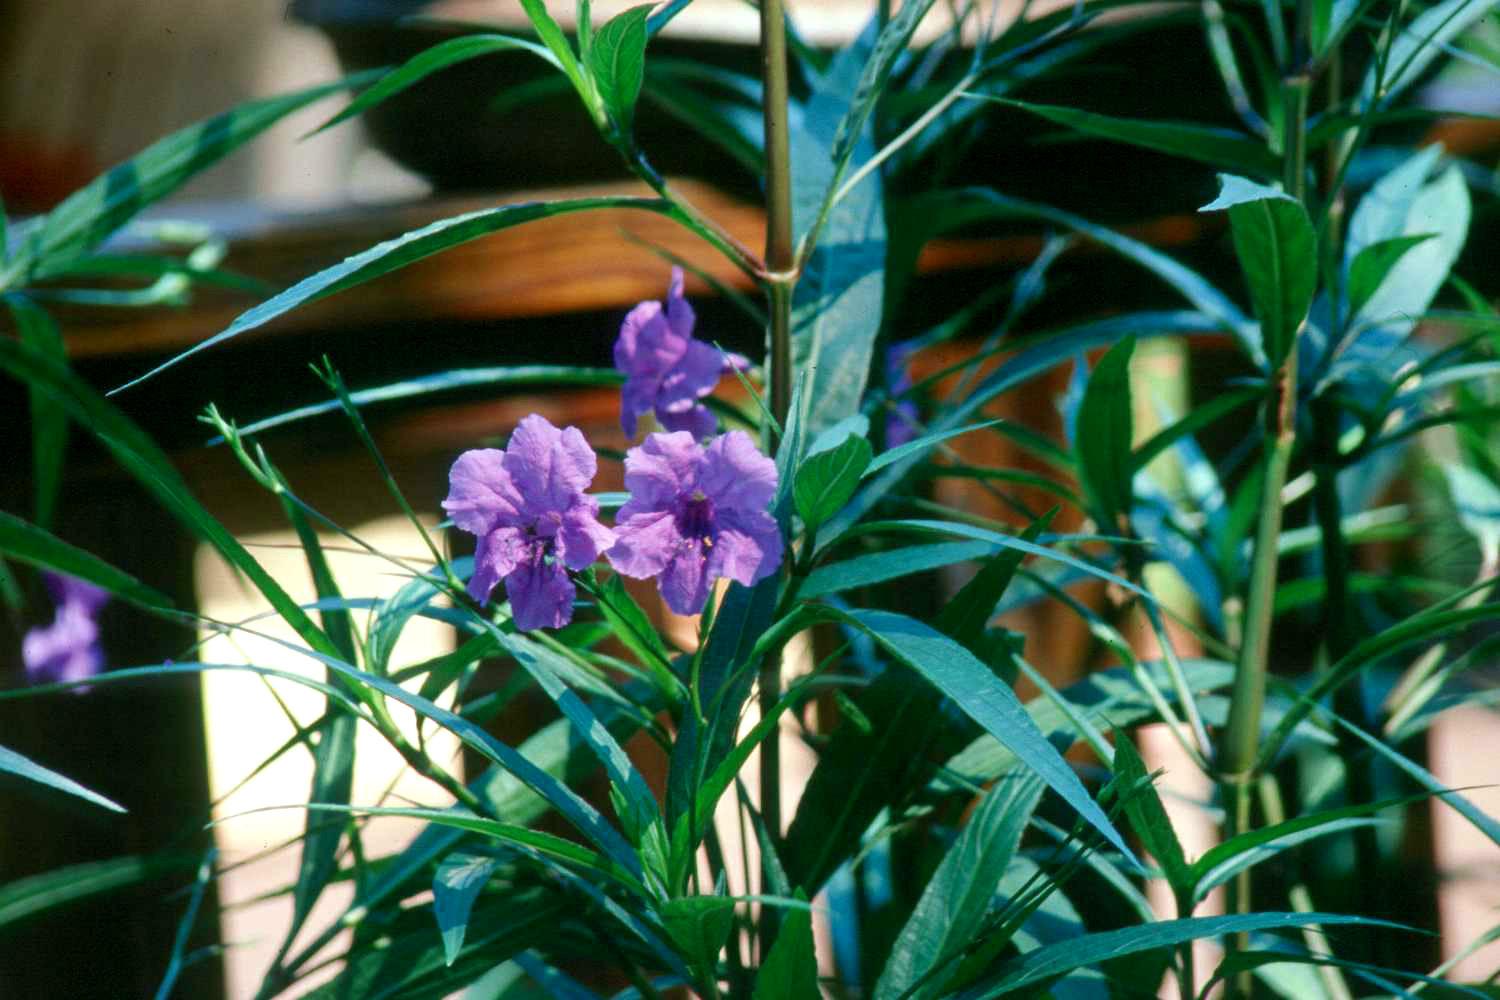 Ruellia has bluish-purple flowers that radiate color from the plant. The deep-green foliage with hints of burgundy is attractive and works well in combination plantings.